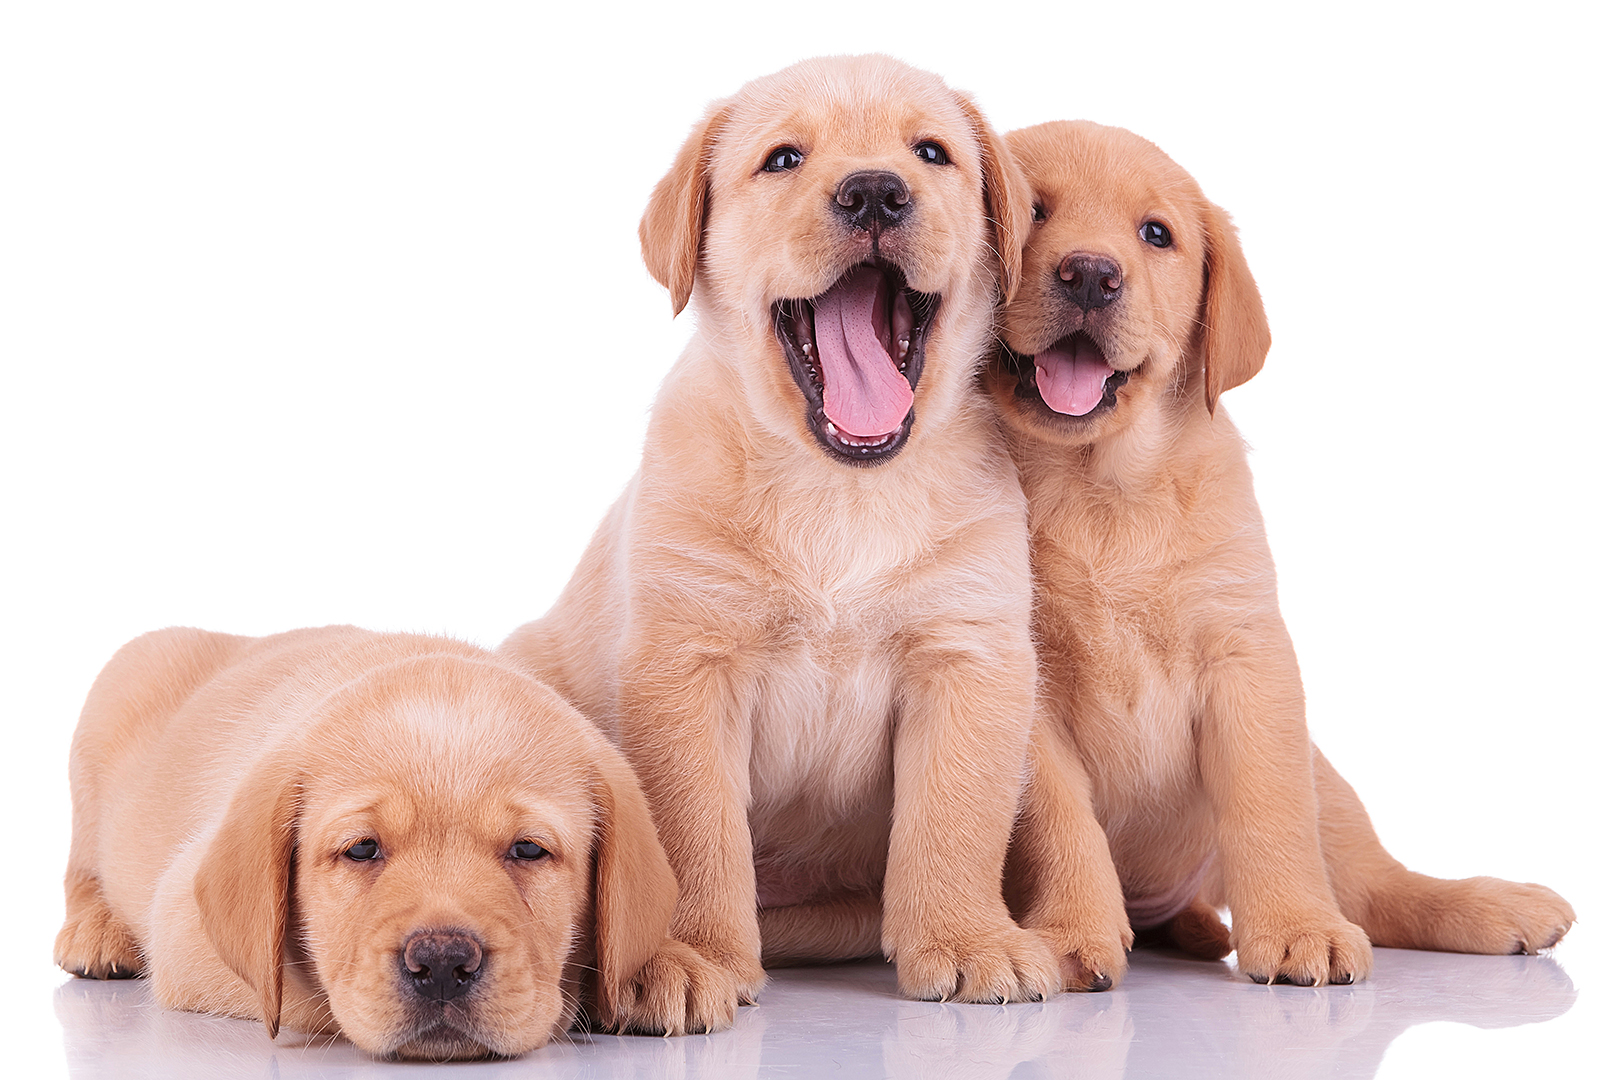 three labrador retriever puppy dogs, two barking and one looking sleepy on white backgroun